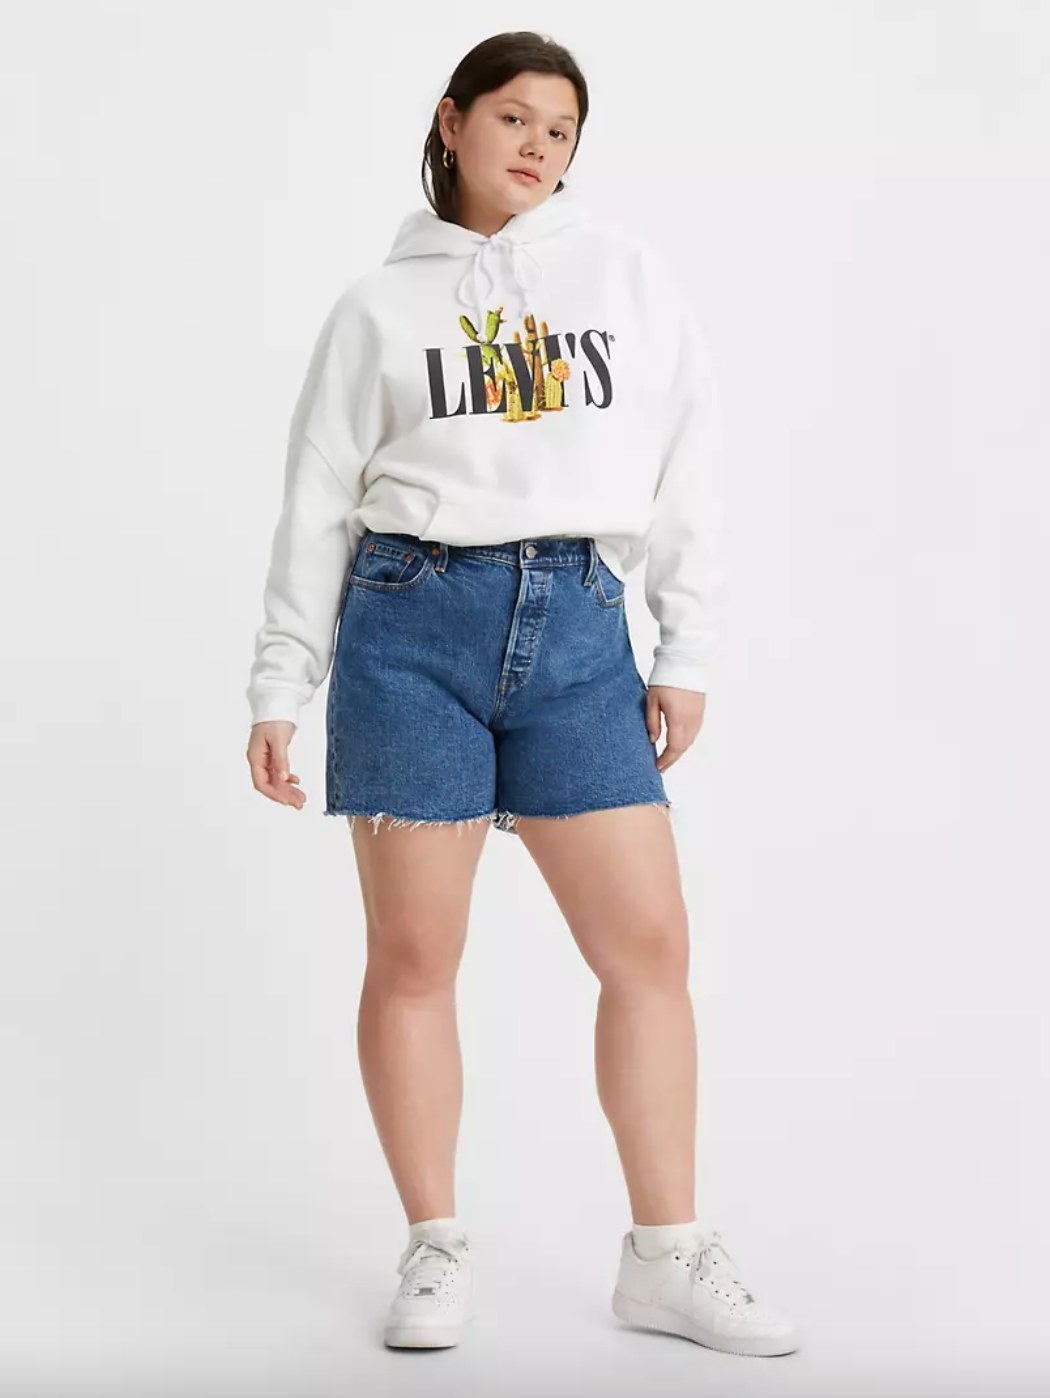 The 501 shorts on a model in a sweatshirt and sneakers